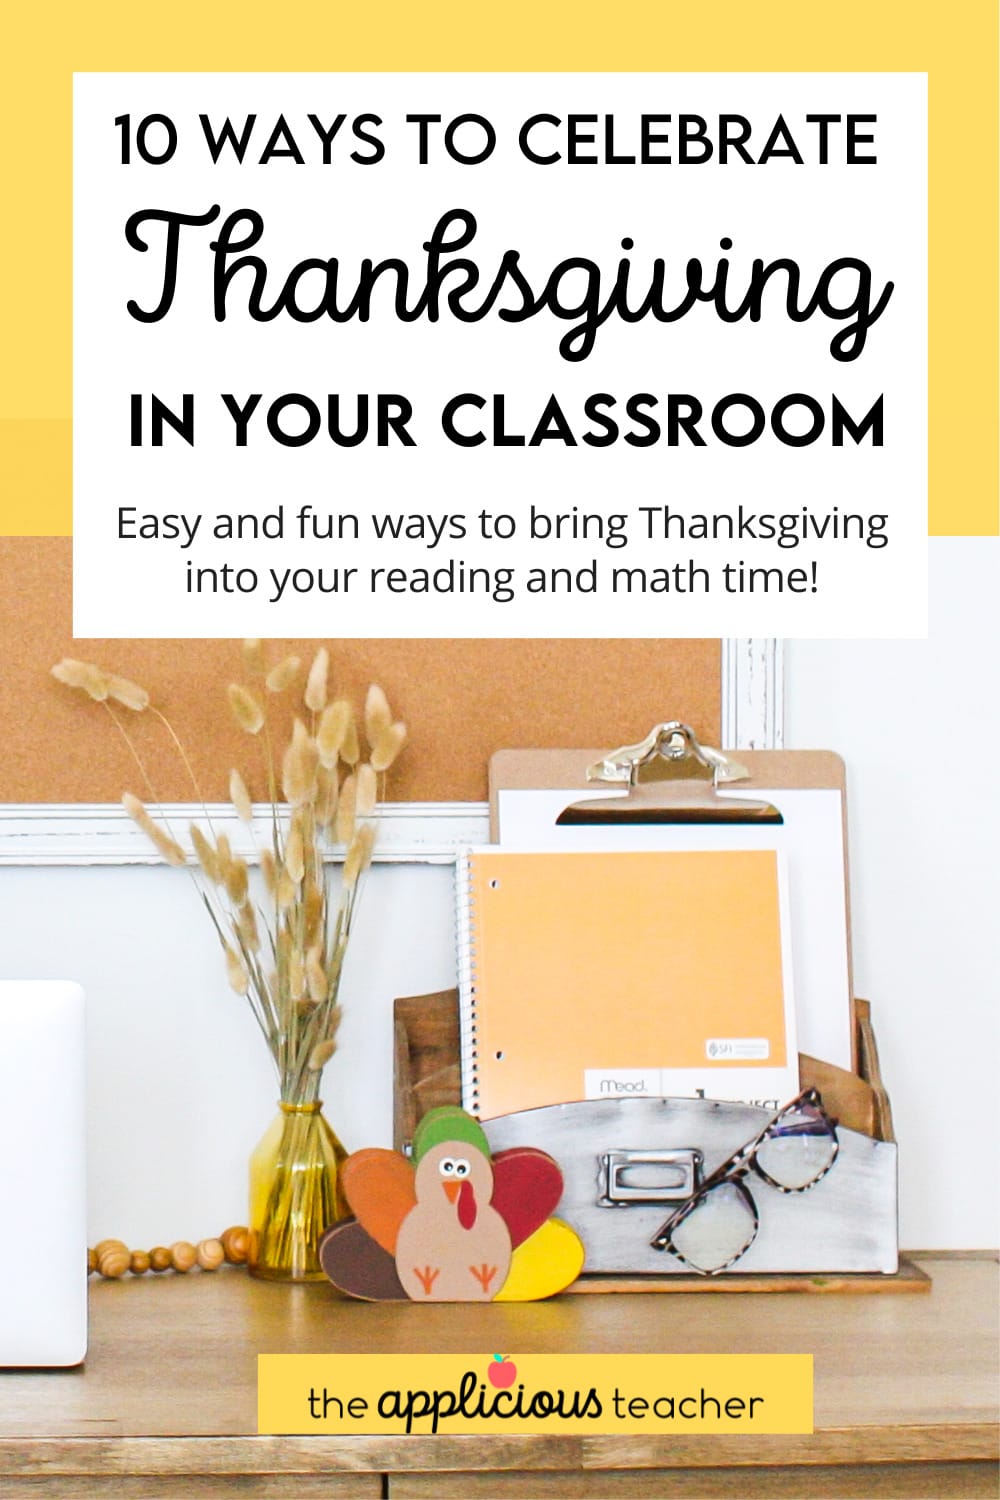 10-fun-thanksgiving-activities-for-the-2nd-grade-classroom-idiom-studio